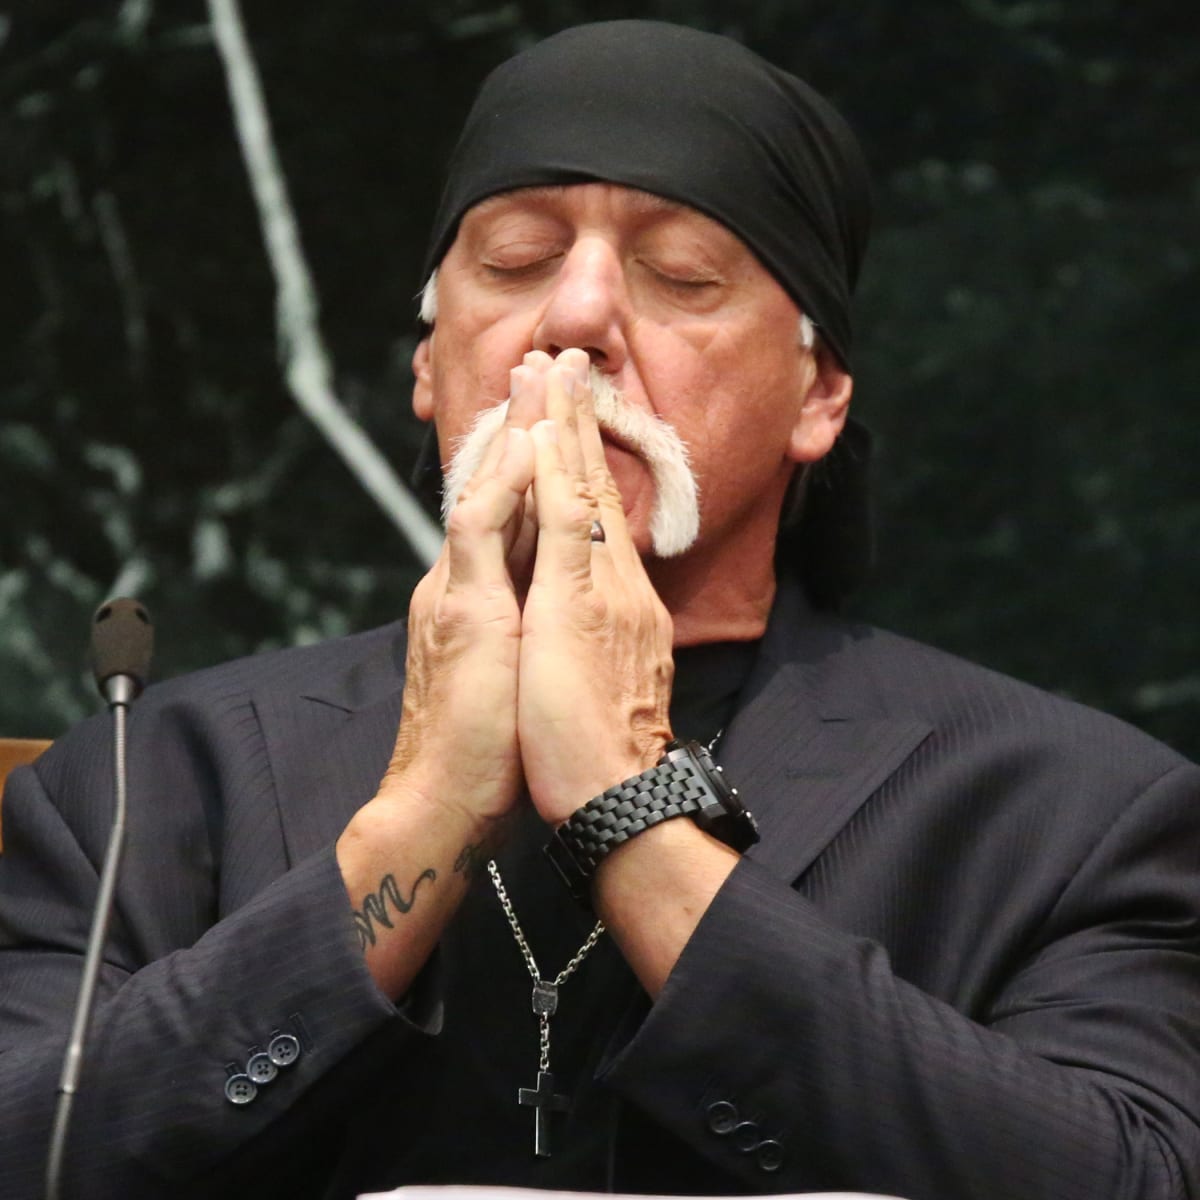 Does Hulk Hogan have shot to beat Gawker in sex tape trial?